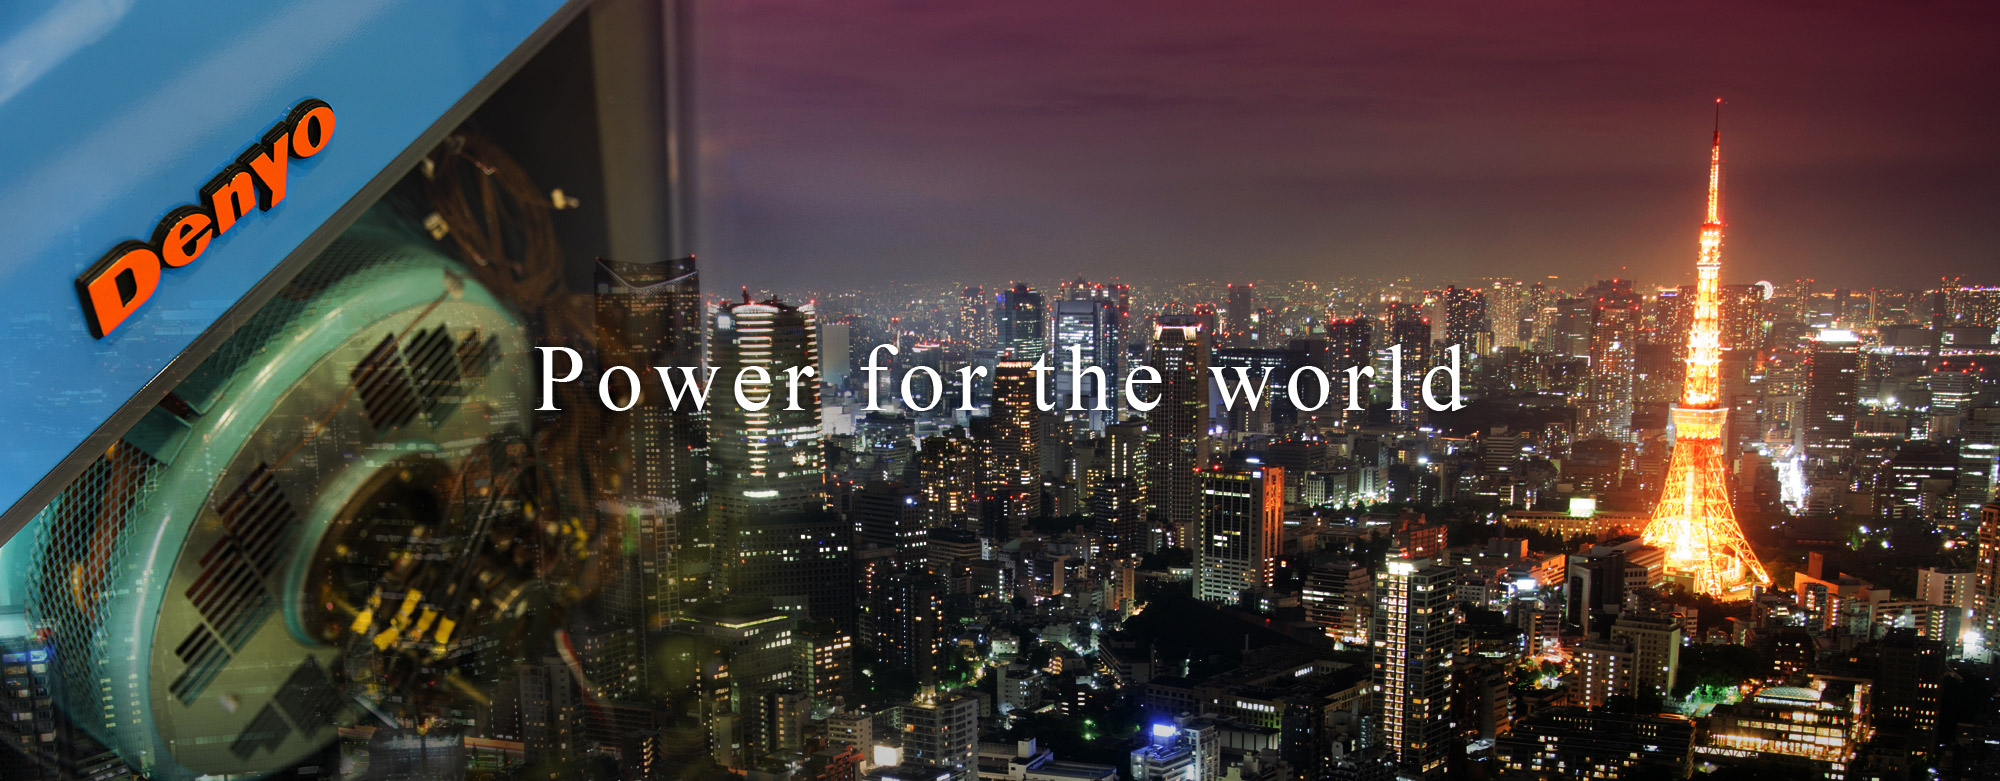 Power for the world